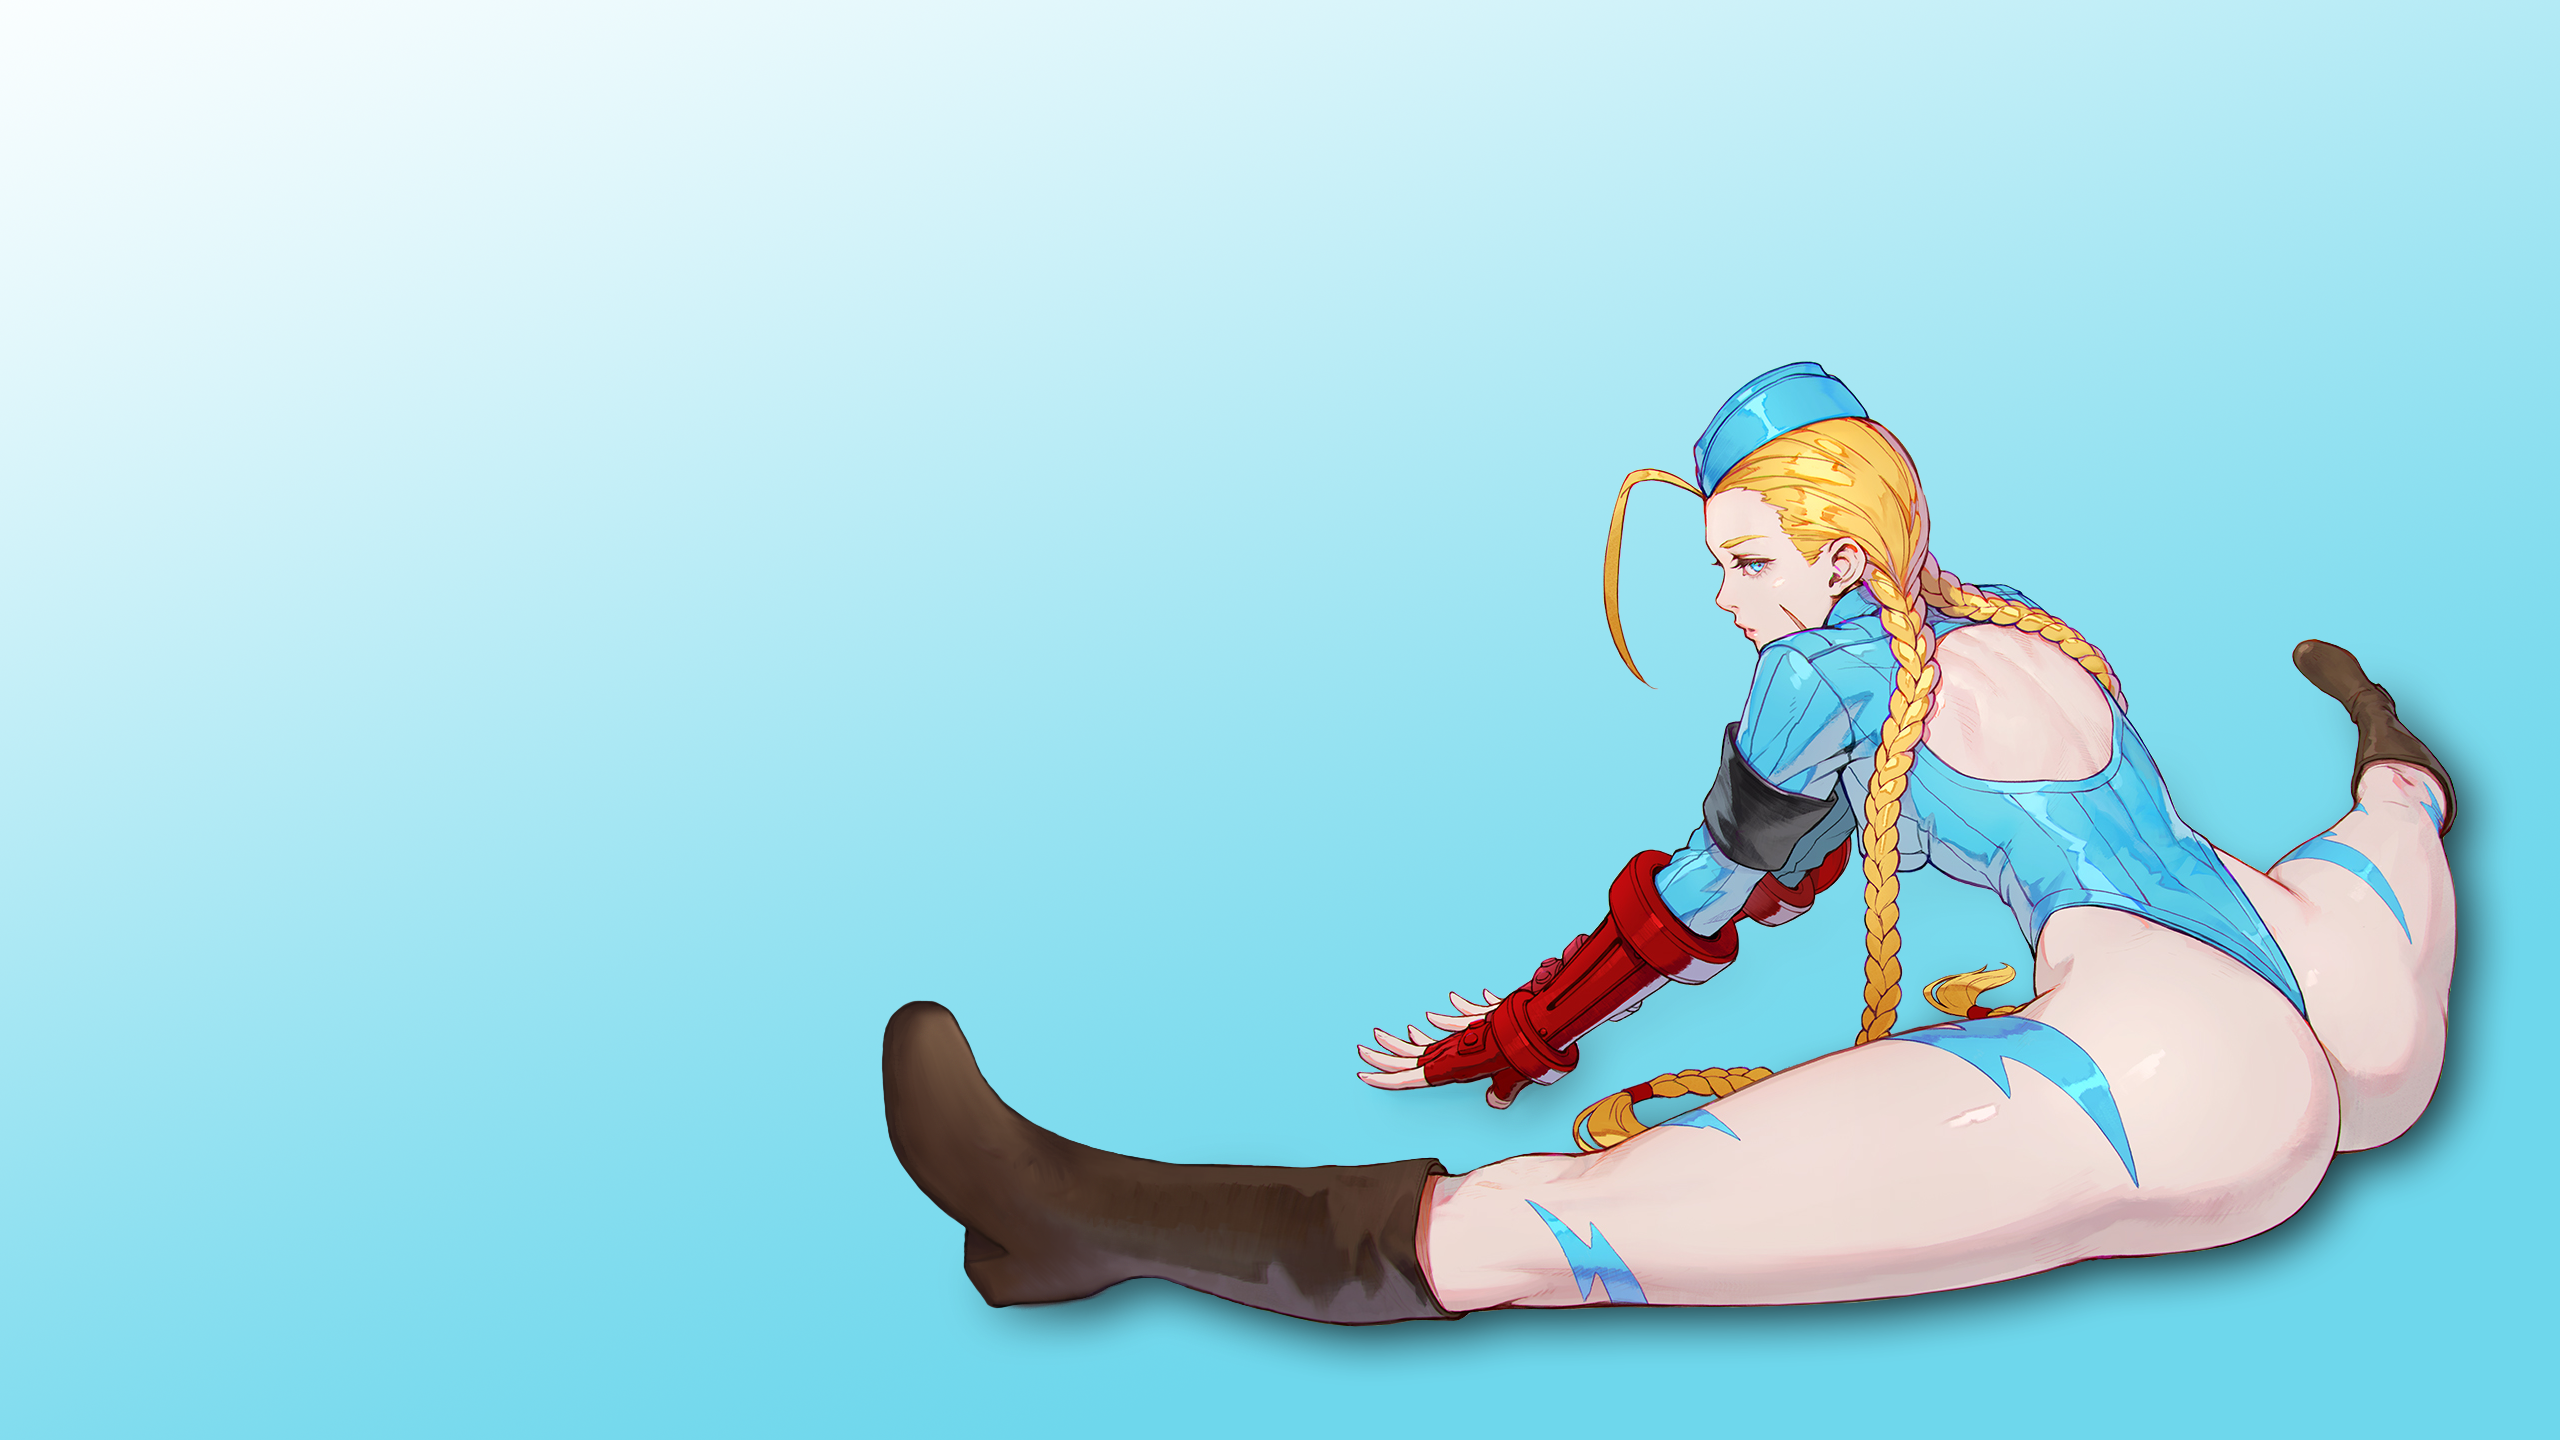 Anime 2560x1440 fighting games bangs blonde hat boots leather boots thighs spread legs gloves red gloves braids ass uniform military uniform Cammy White Capcom long hair Street Fighter video game girls blue eyes simple background splits video games minimalism looking at viewer twintails